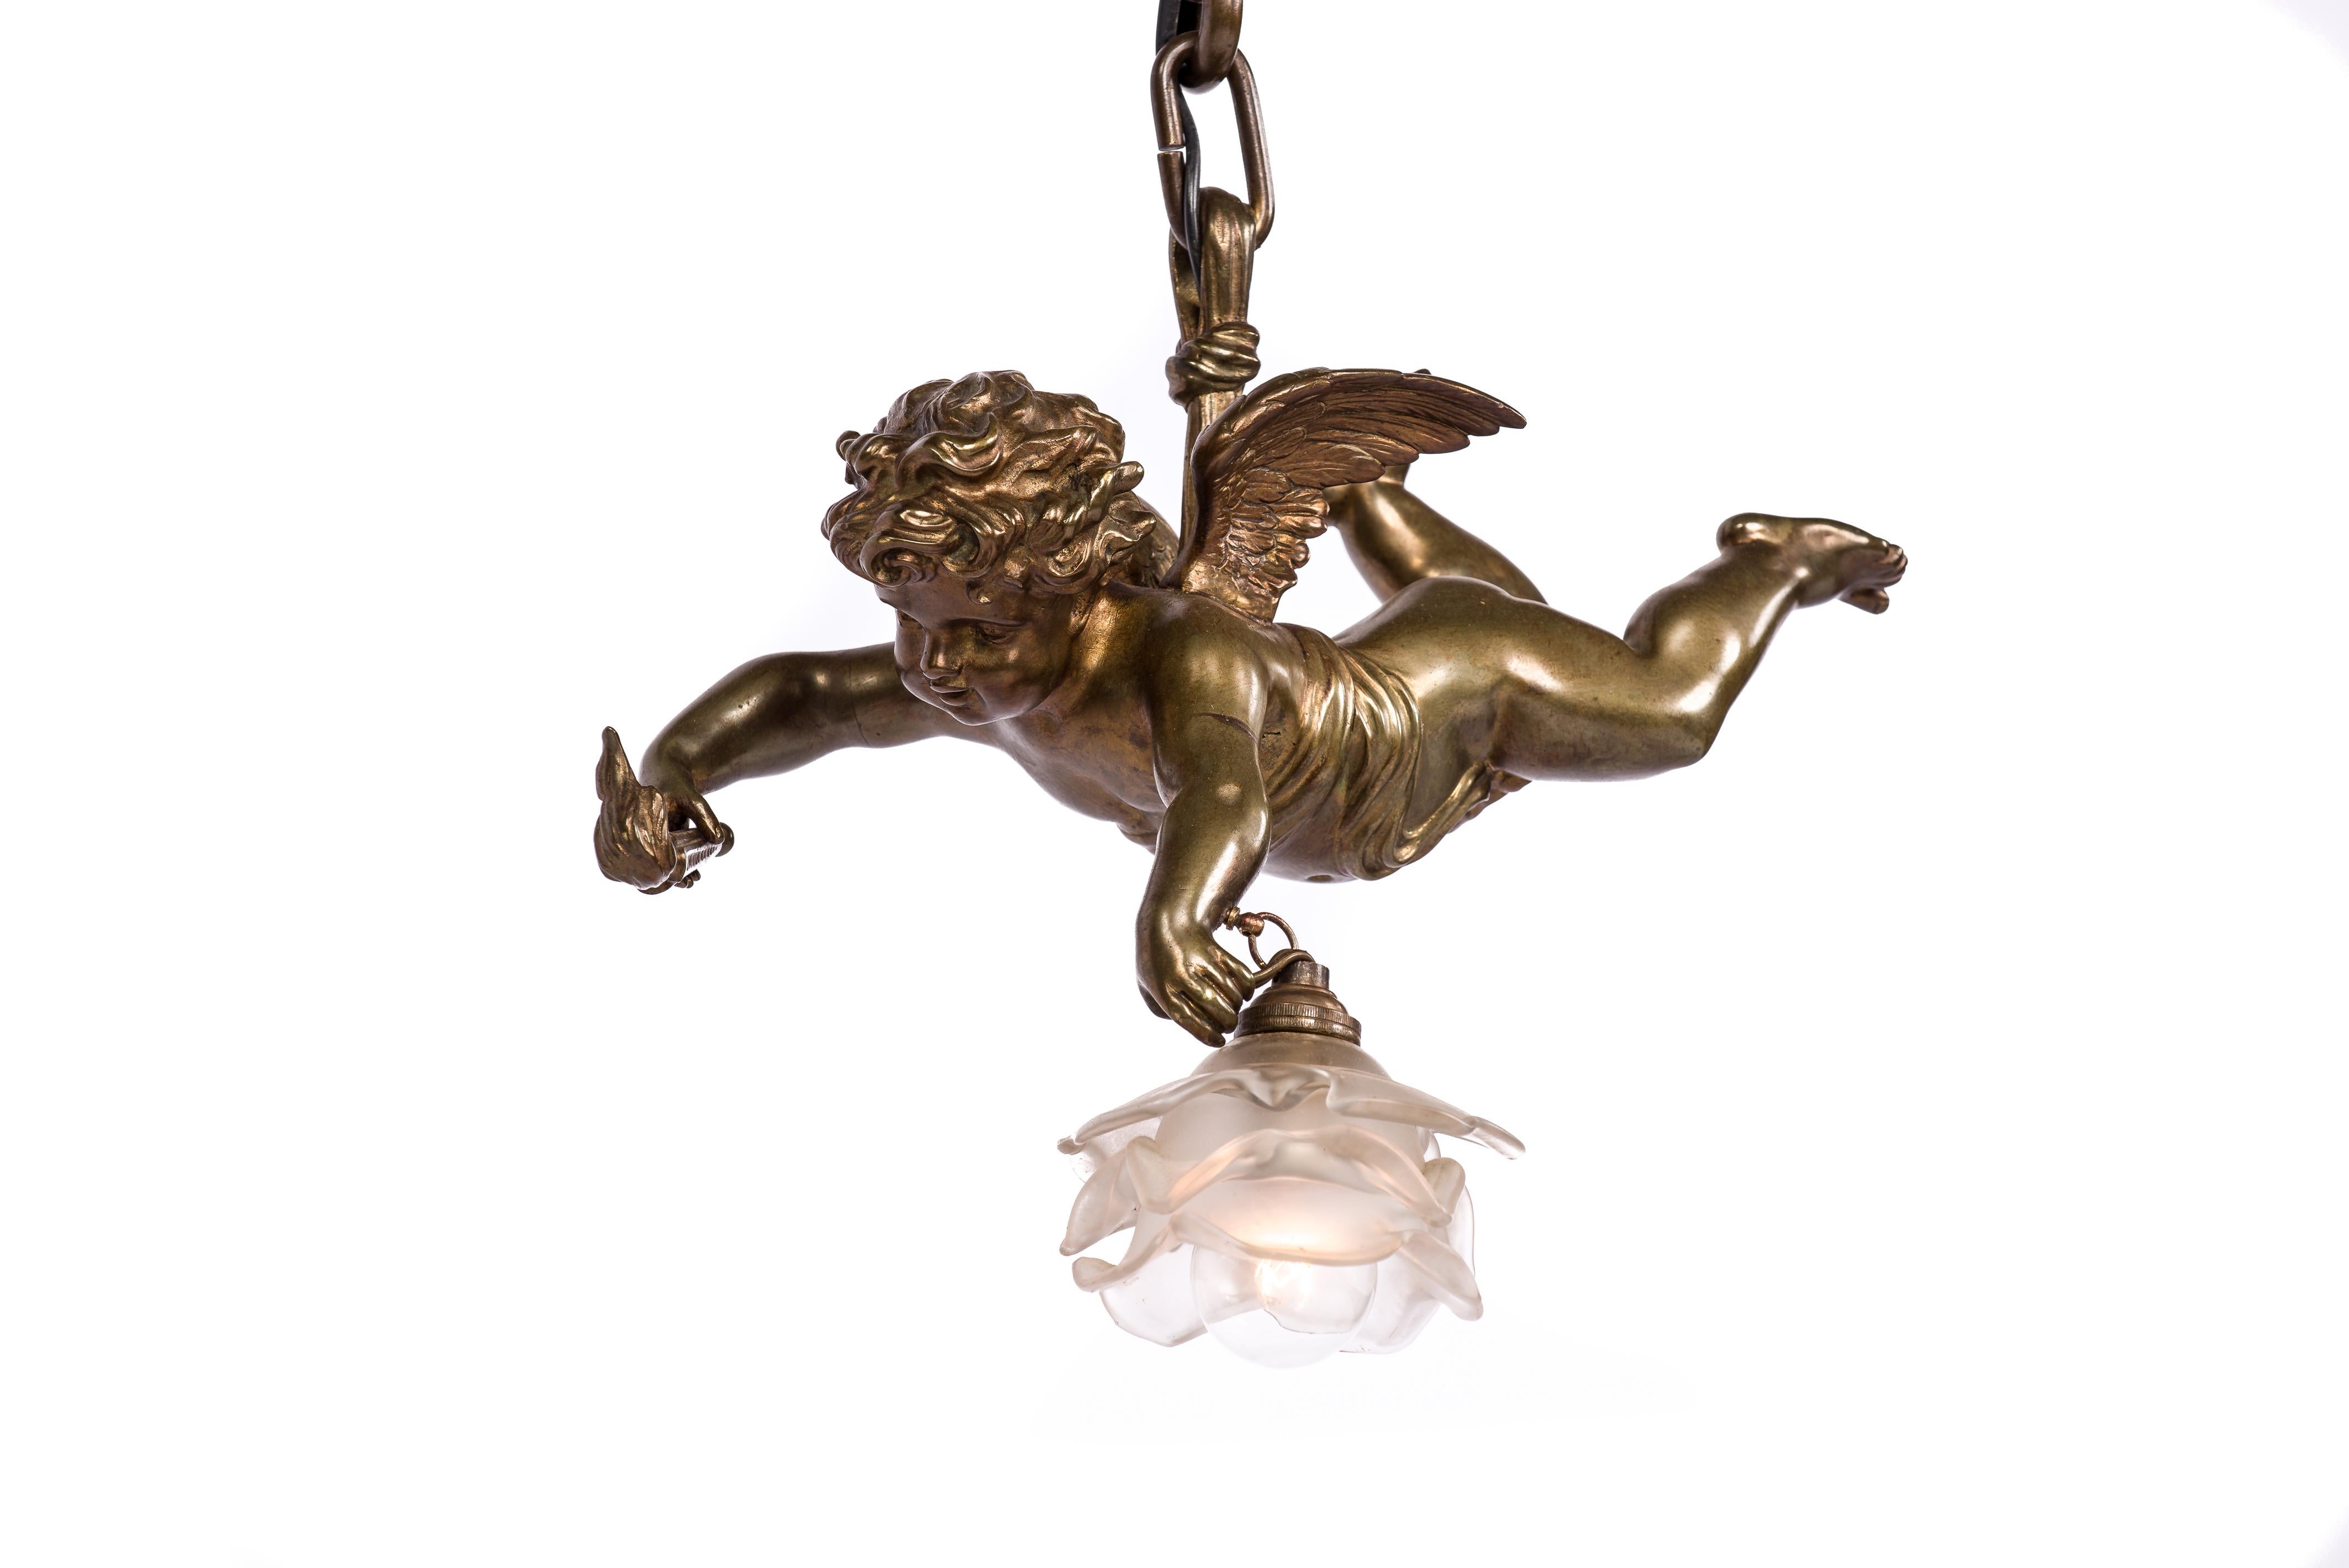 A classic cast brass angel or putti pendant light made in France in the late 19th century. 
The angel, also known as a cherub holds a flaming torch in one hand and an etched glass shade in the shape of a rose in the other. The flame of the Olympic